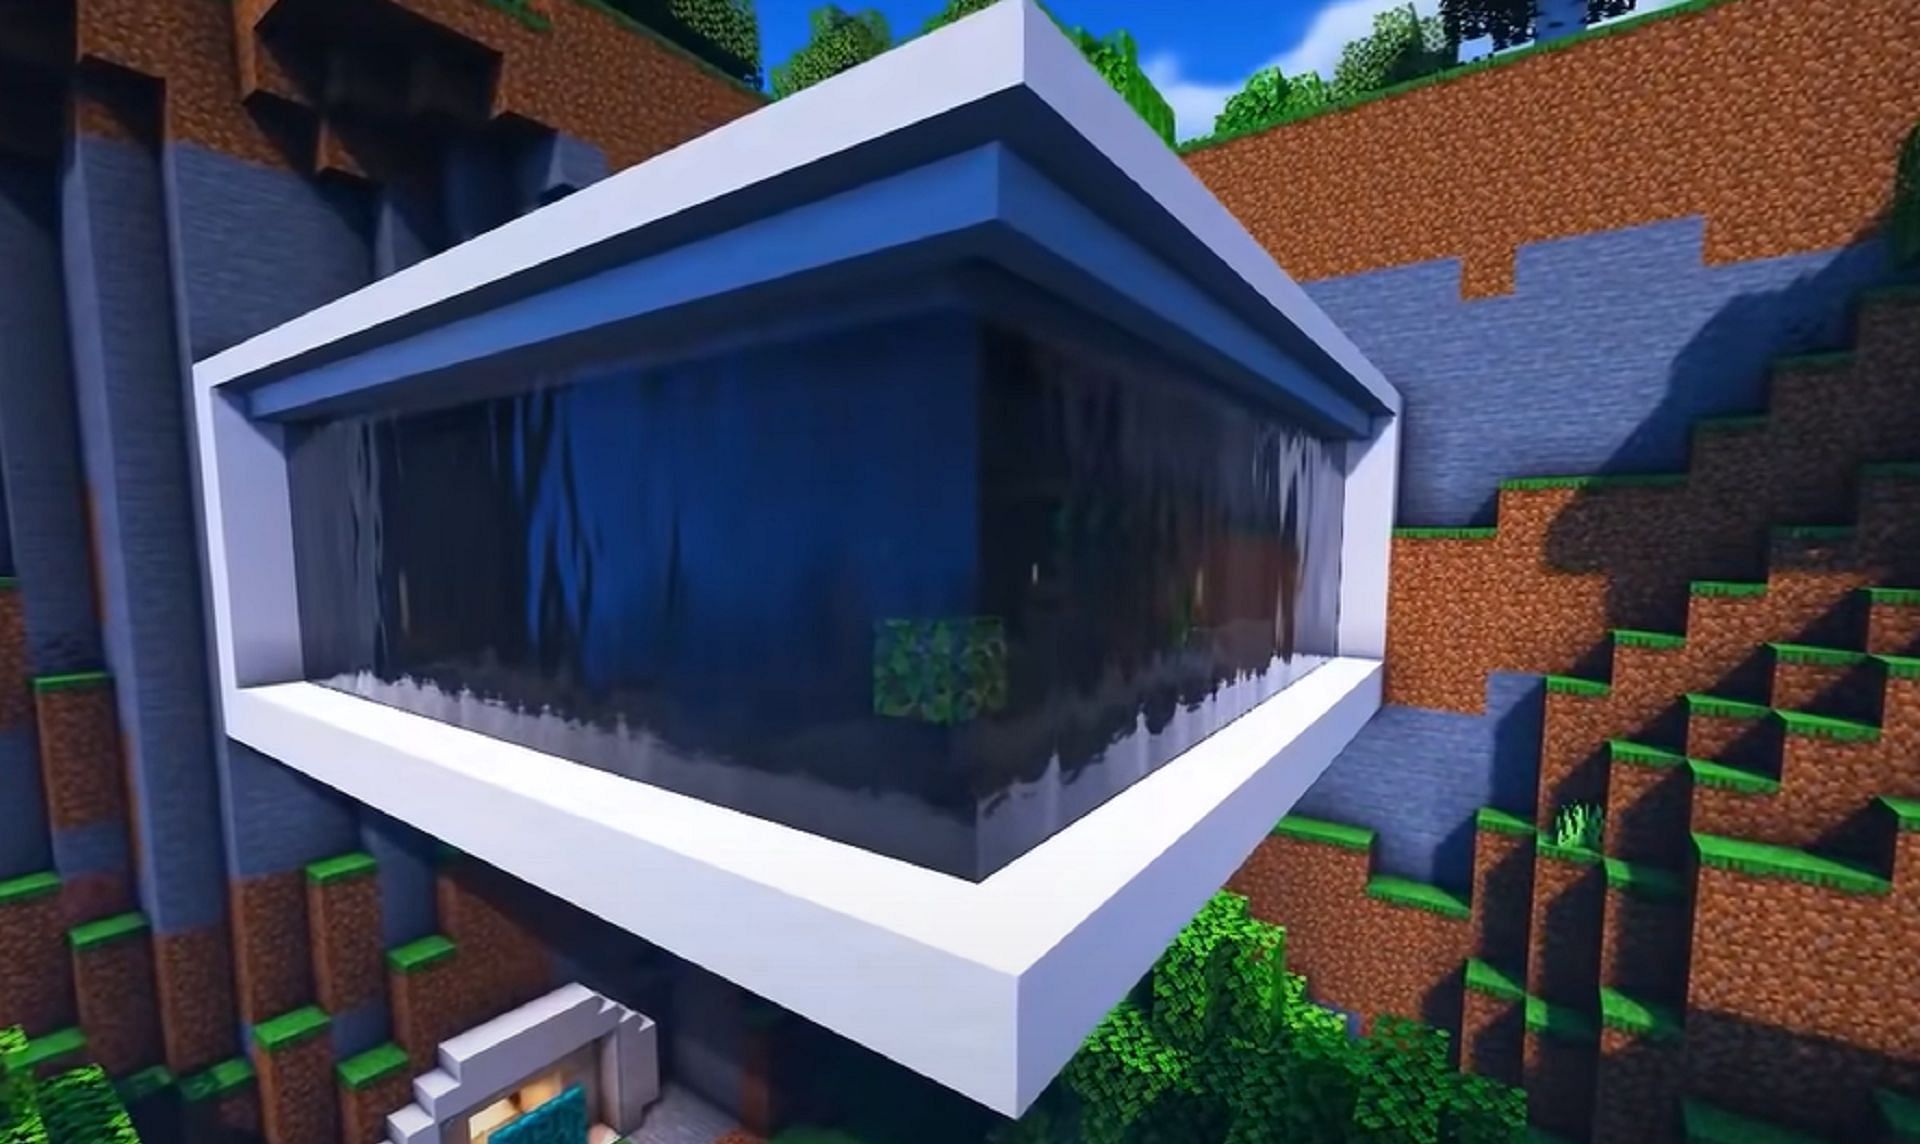 This house skin is one of the most unique in version 1.19 (Image via Random Steve Guy/YouTube)